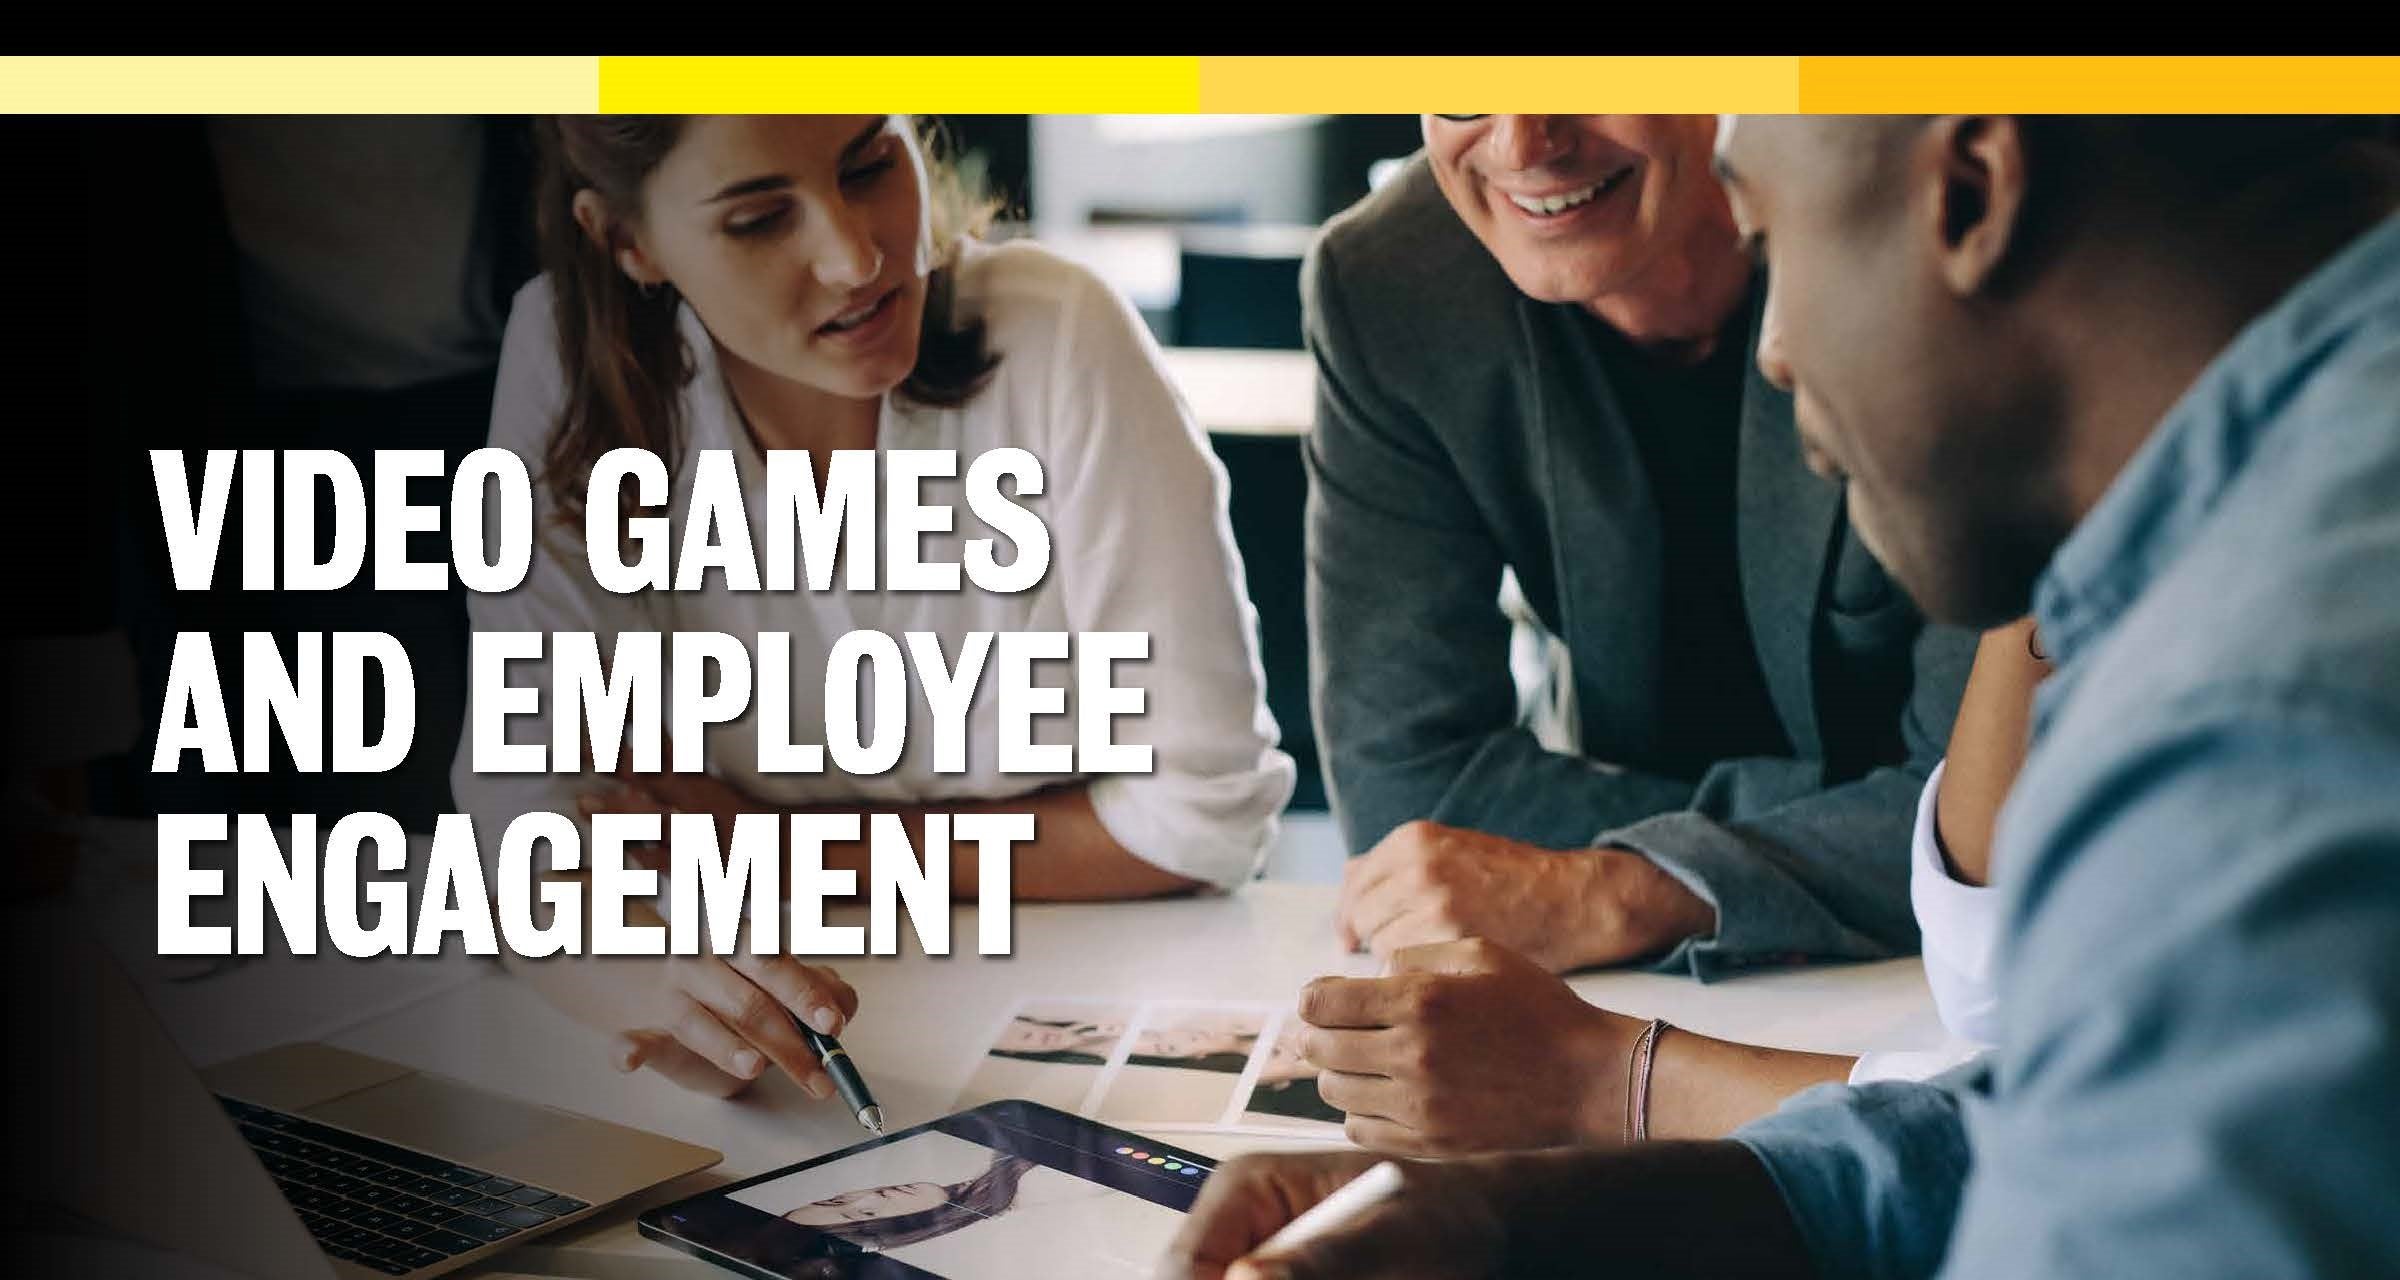 Video Games and Employee Engagement poster title with three people around a tablet